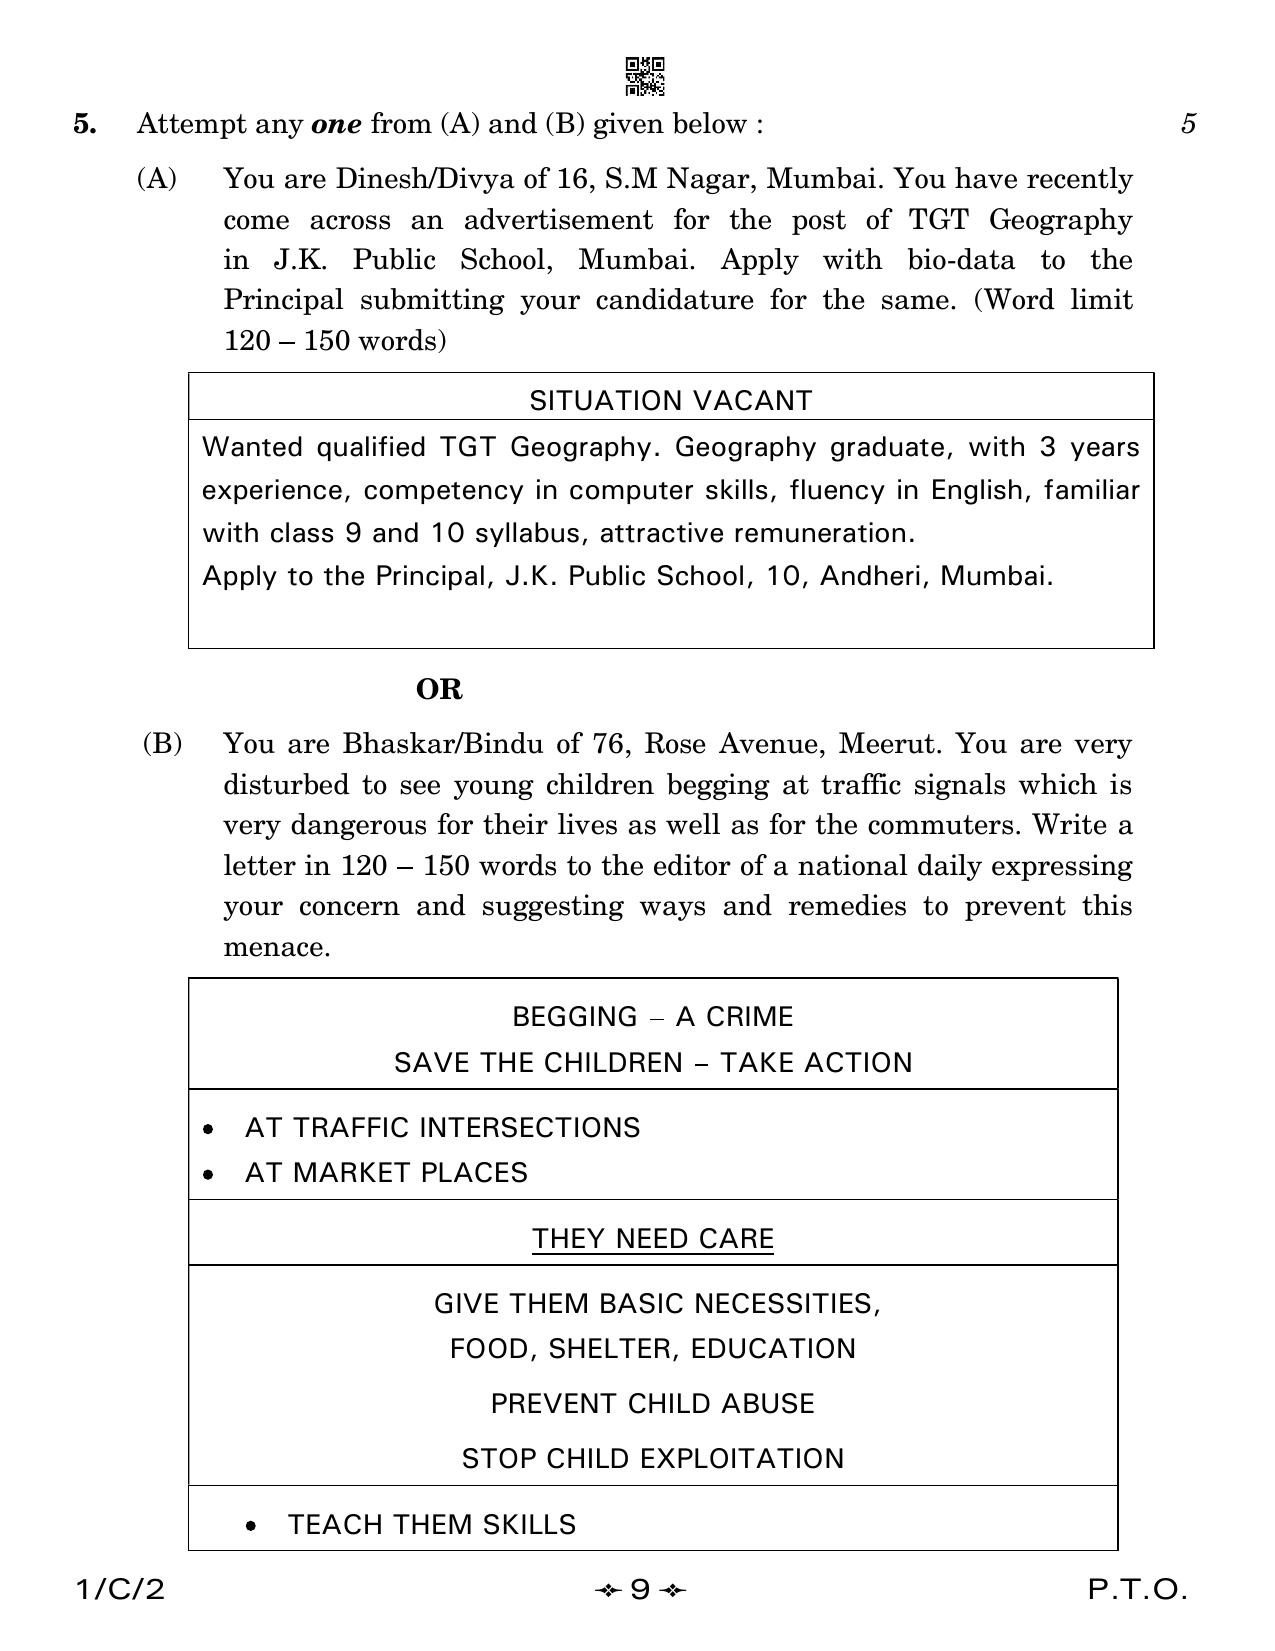 CBSE Class 12 1-2 English Core 2023 (Compartment) Question Paper - Page 9